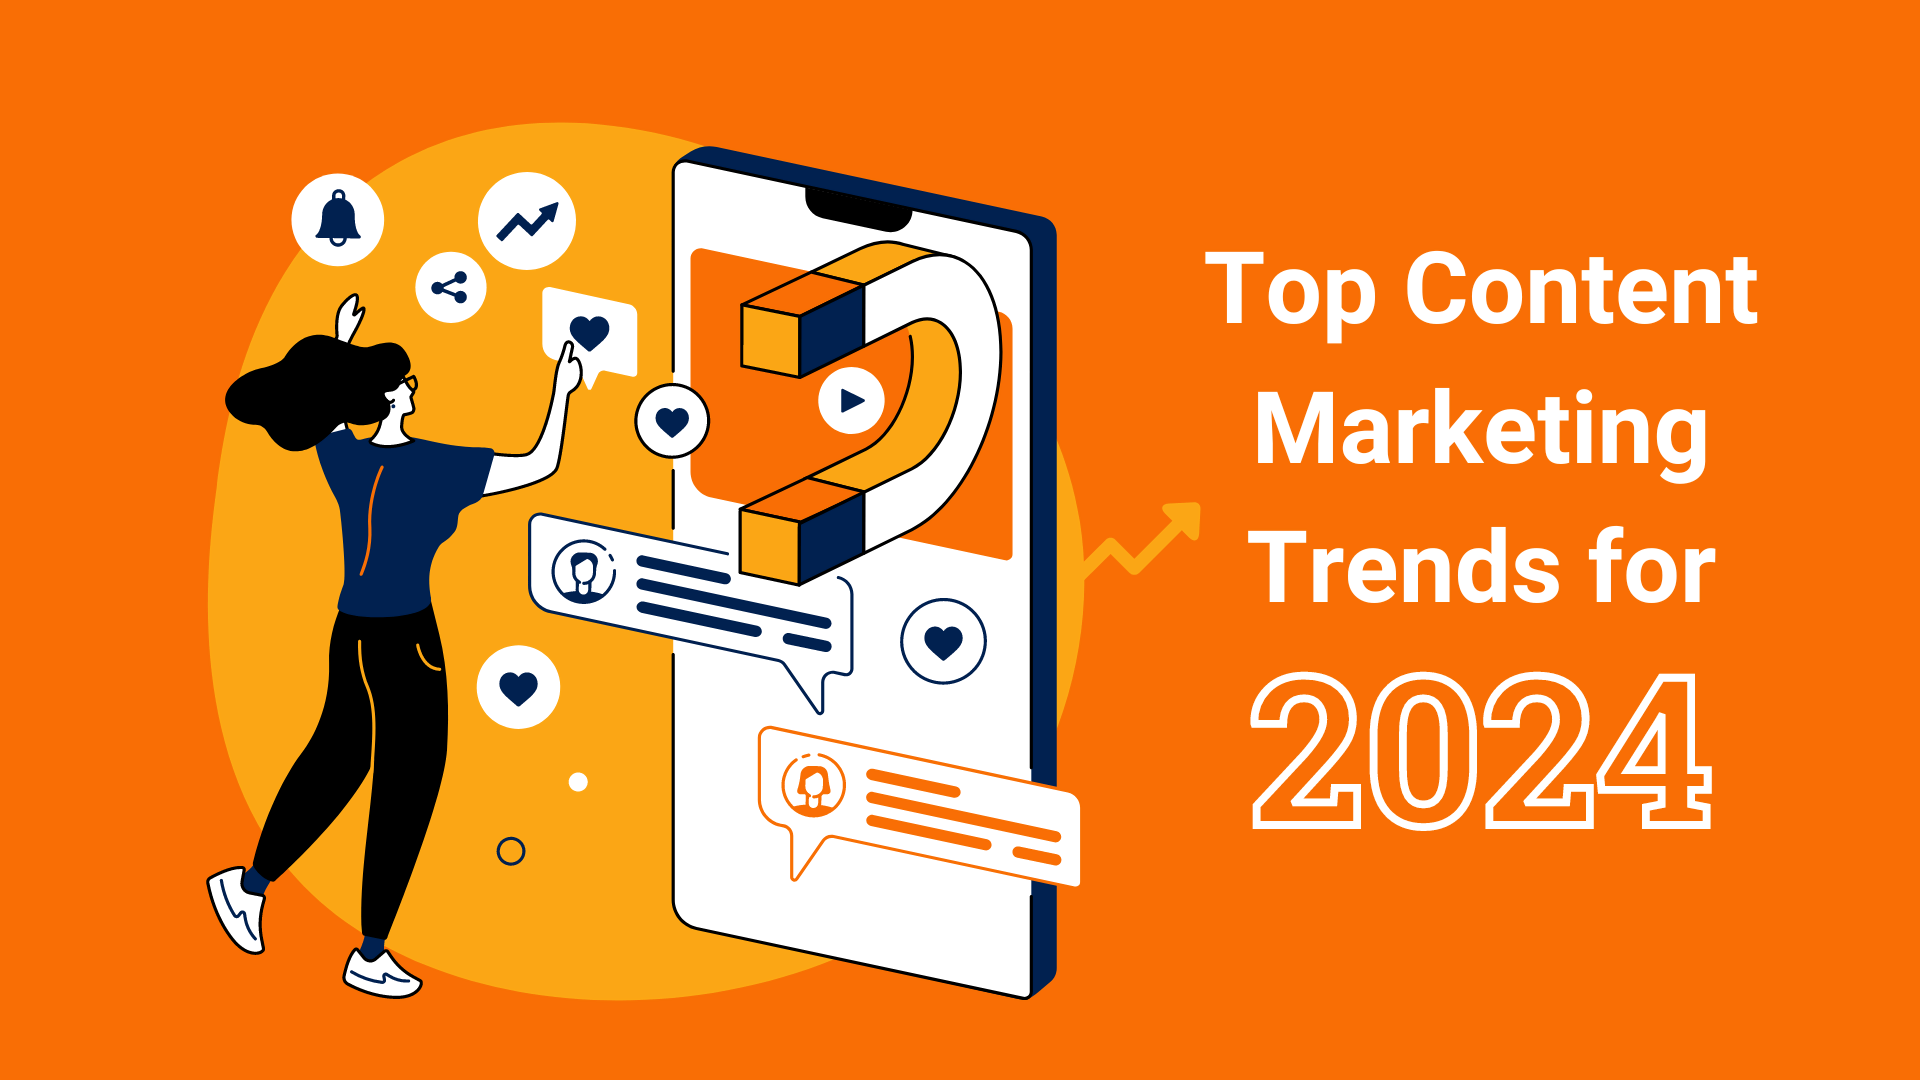 Future-Proof Your Strategy: Content Marketing Trends 2024 Revealed